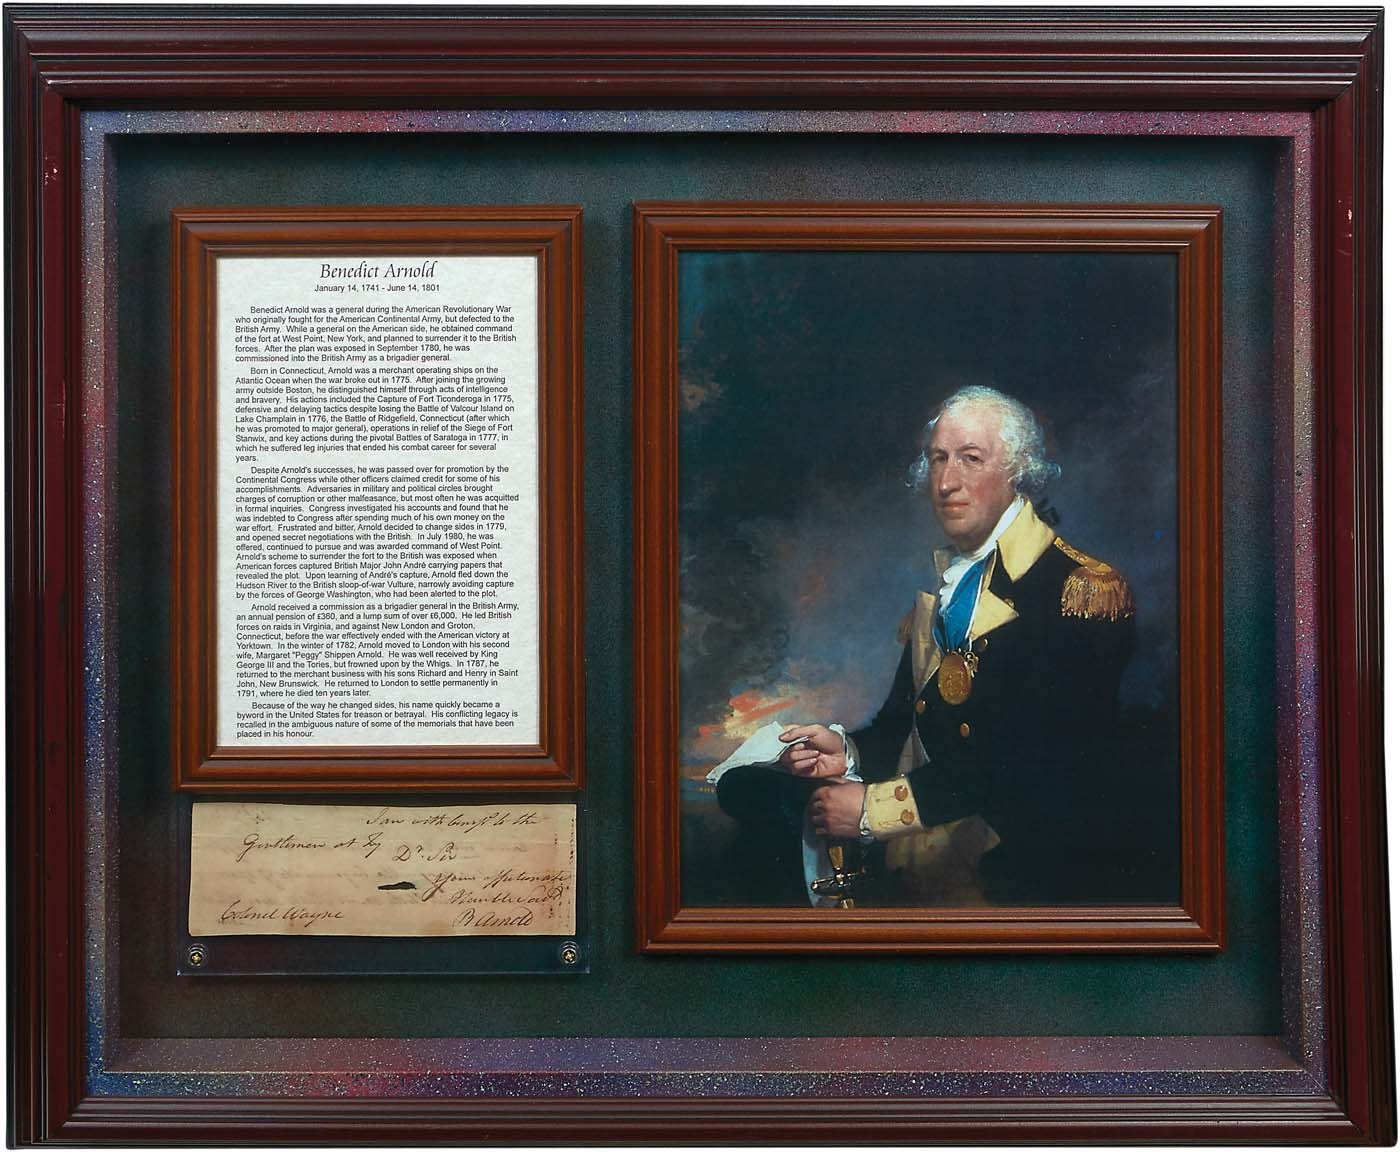 - Benedict Arnold Signed Letter Display with "Boston" Content (JSA)